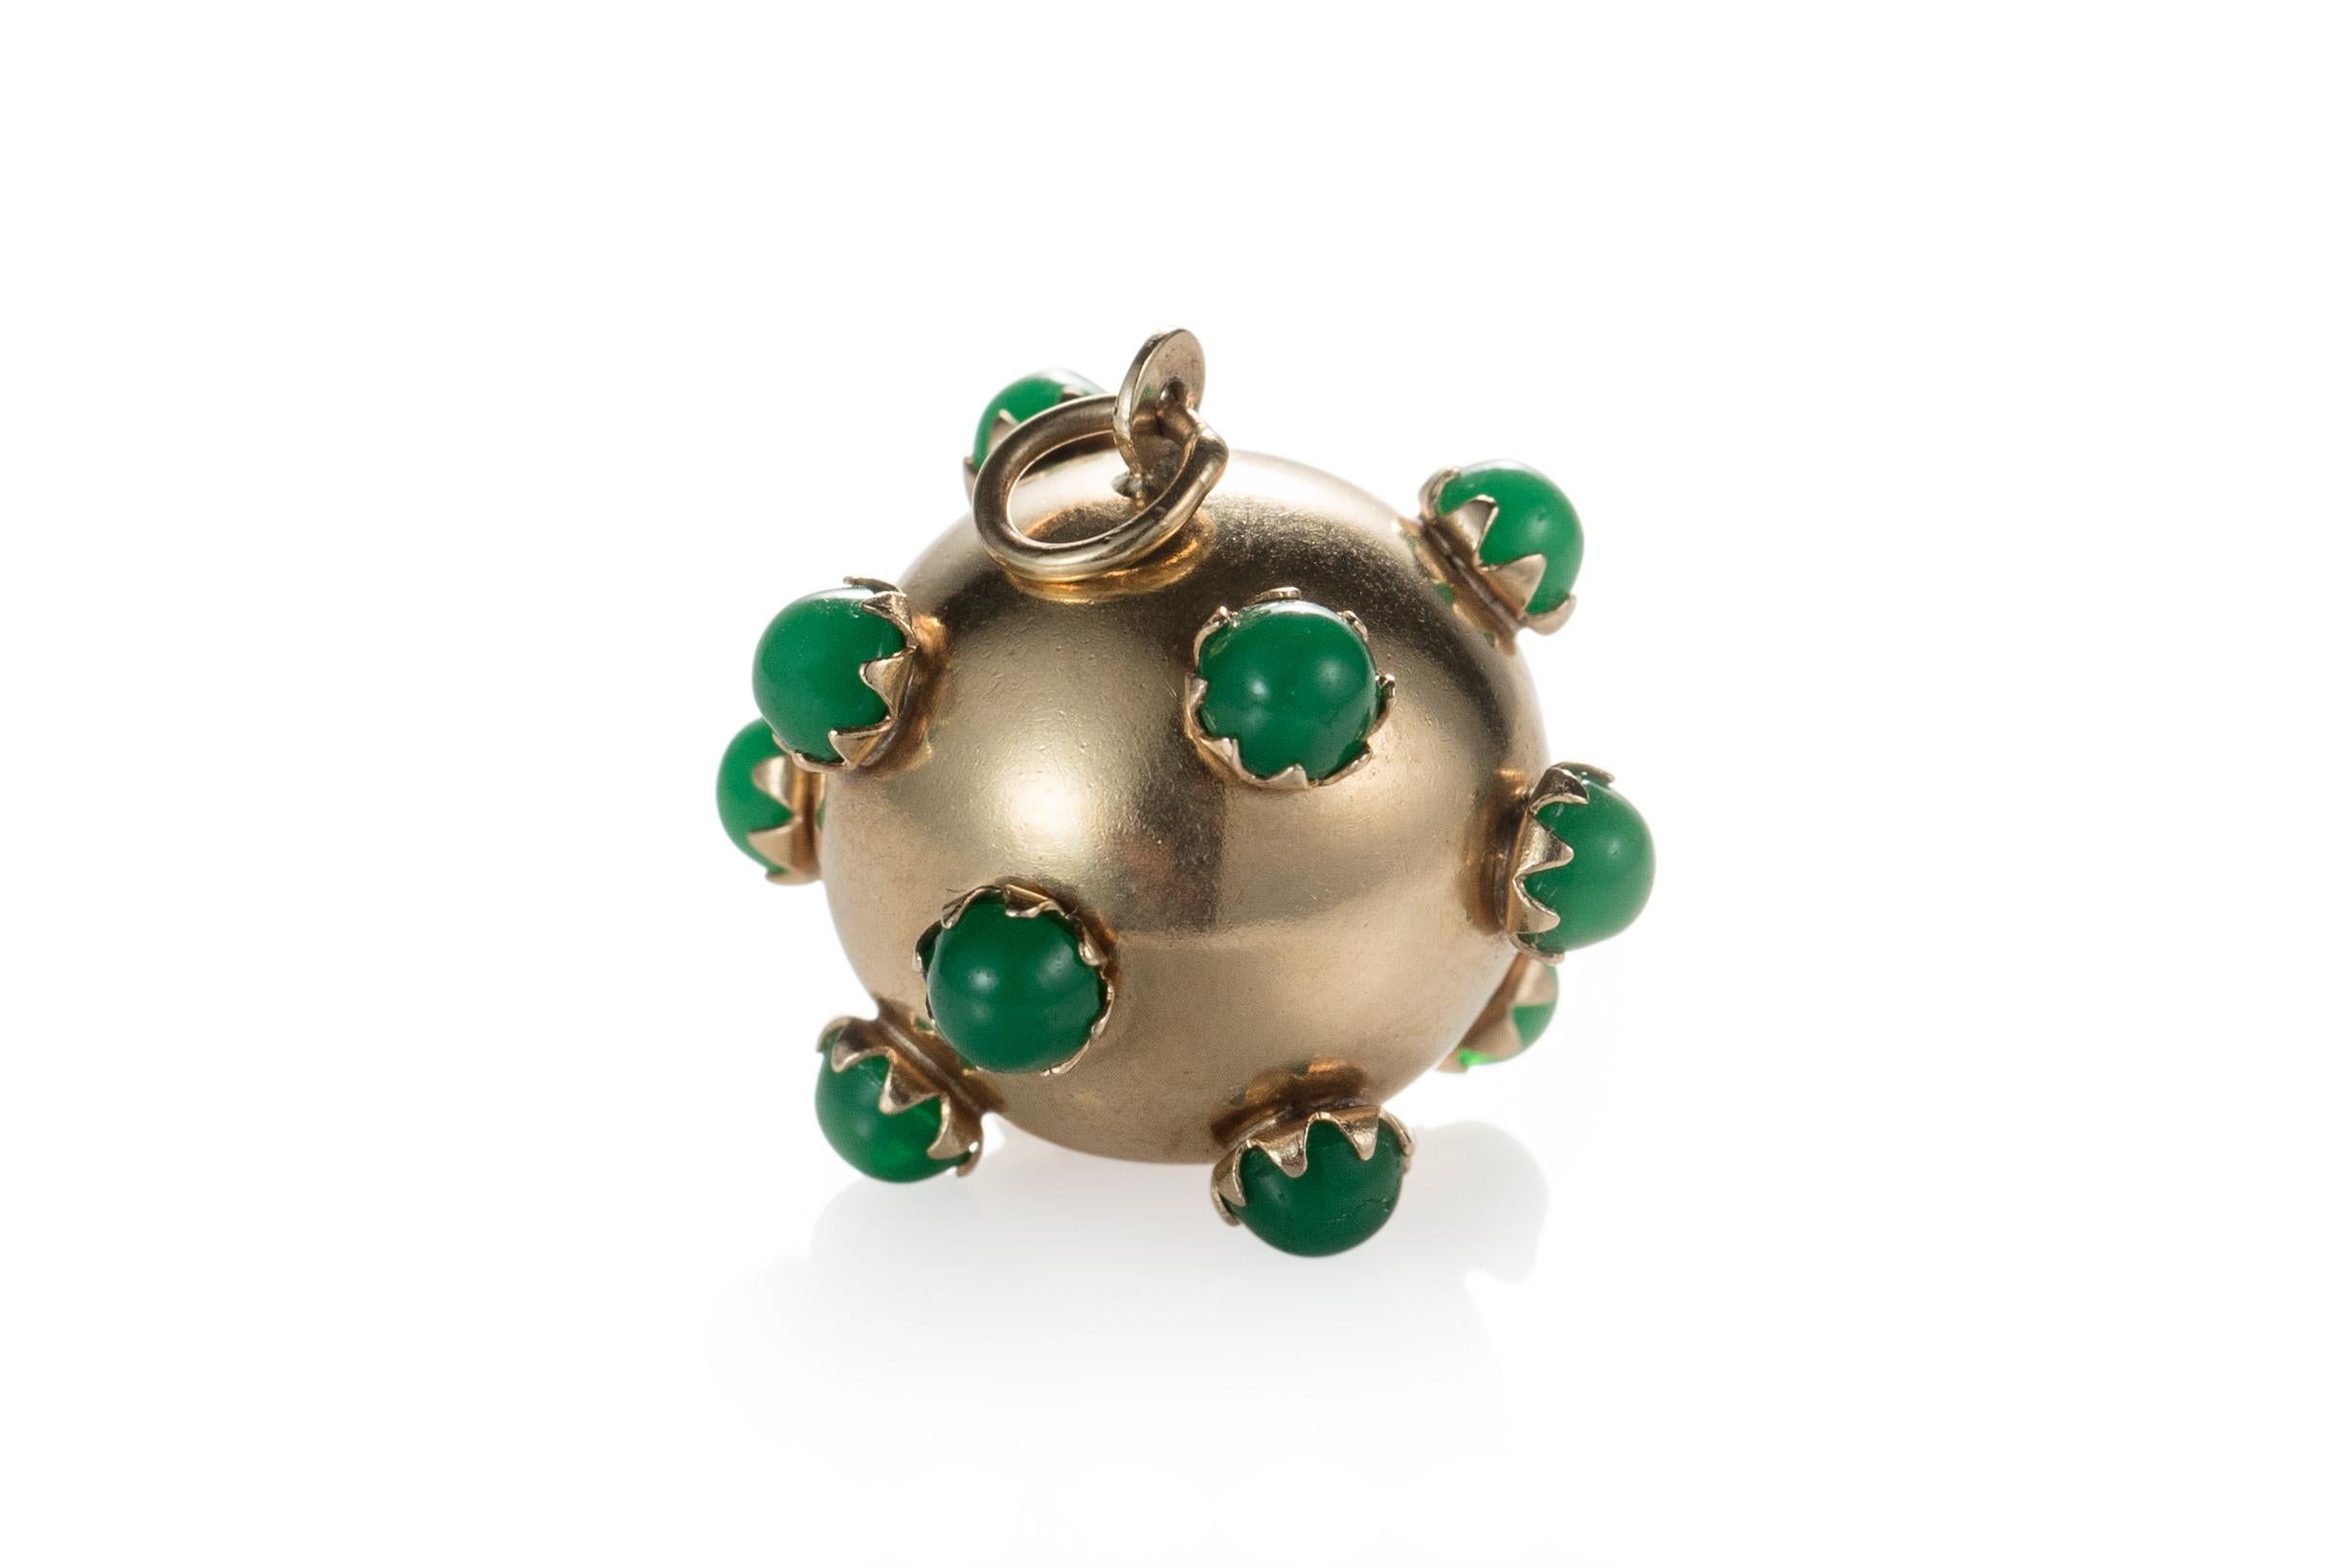 Metal Type: 18 Karat Yellow Gold
Weight: 5 grams
Size: 3/4 inch diameter 

Features several beautiful green Chalcedony cabochon gemstone. Each gemstone is prong-set with a sharp 'U' profile. 
This sputnik pendant is from 1945 and is absolutely